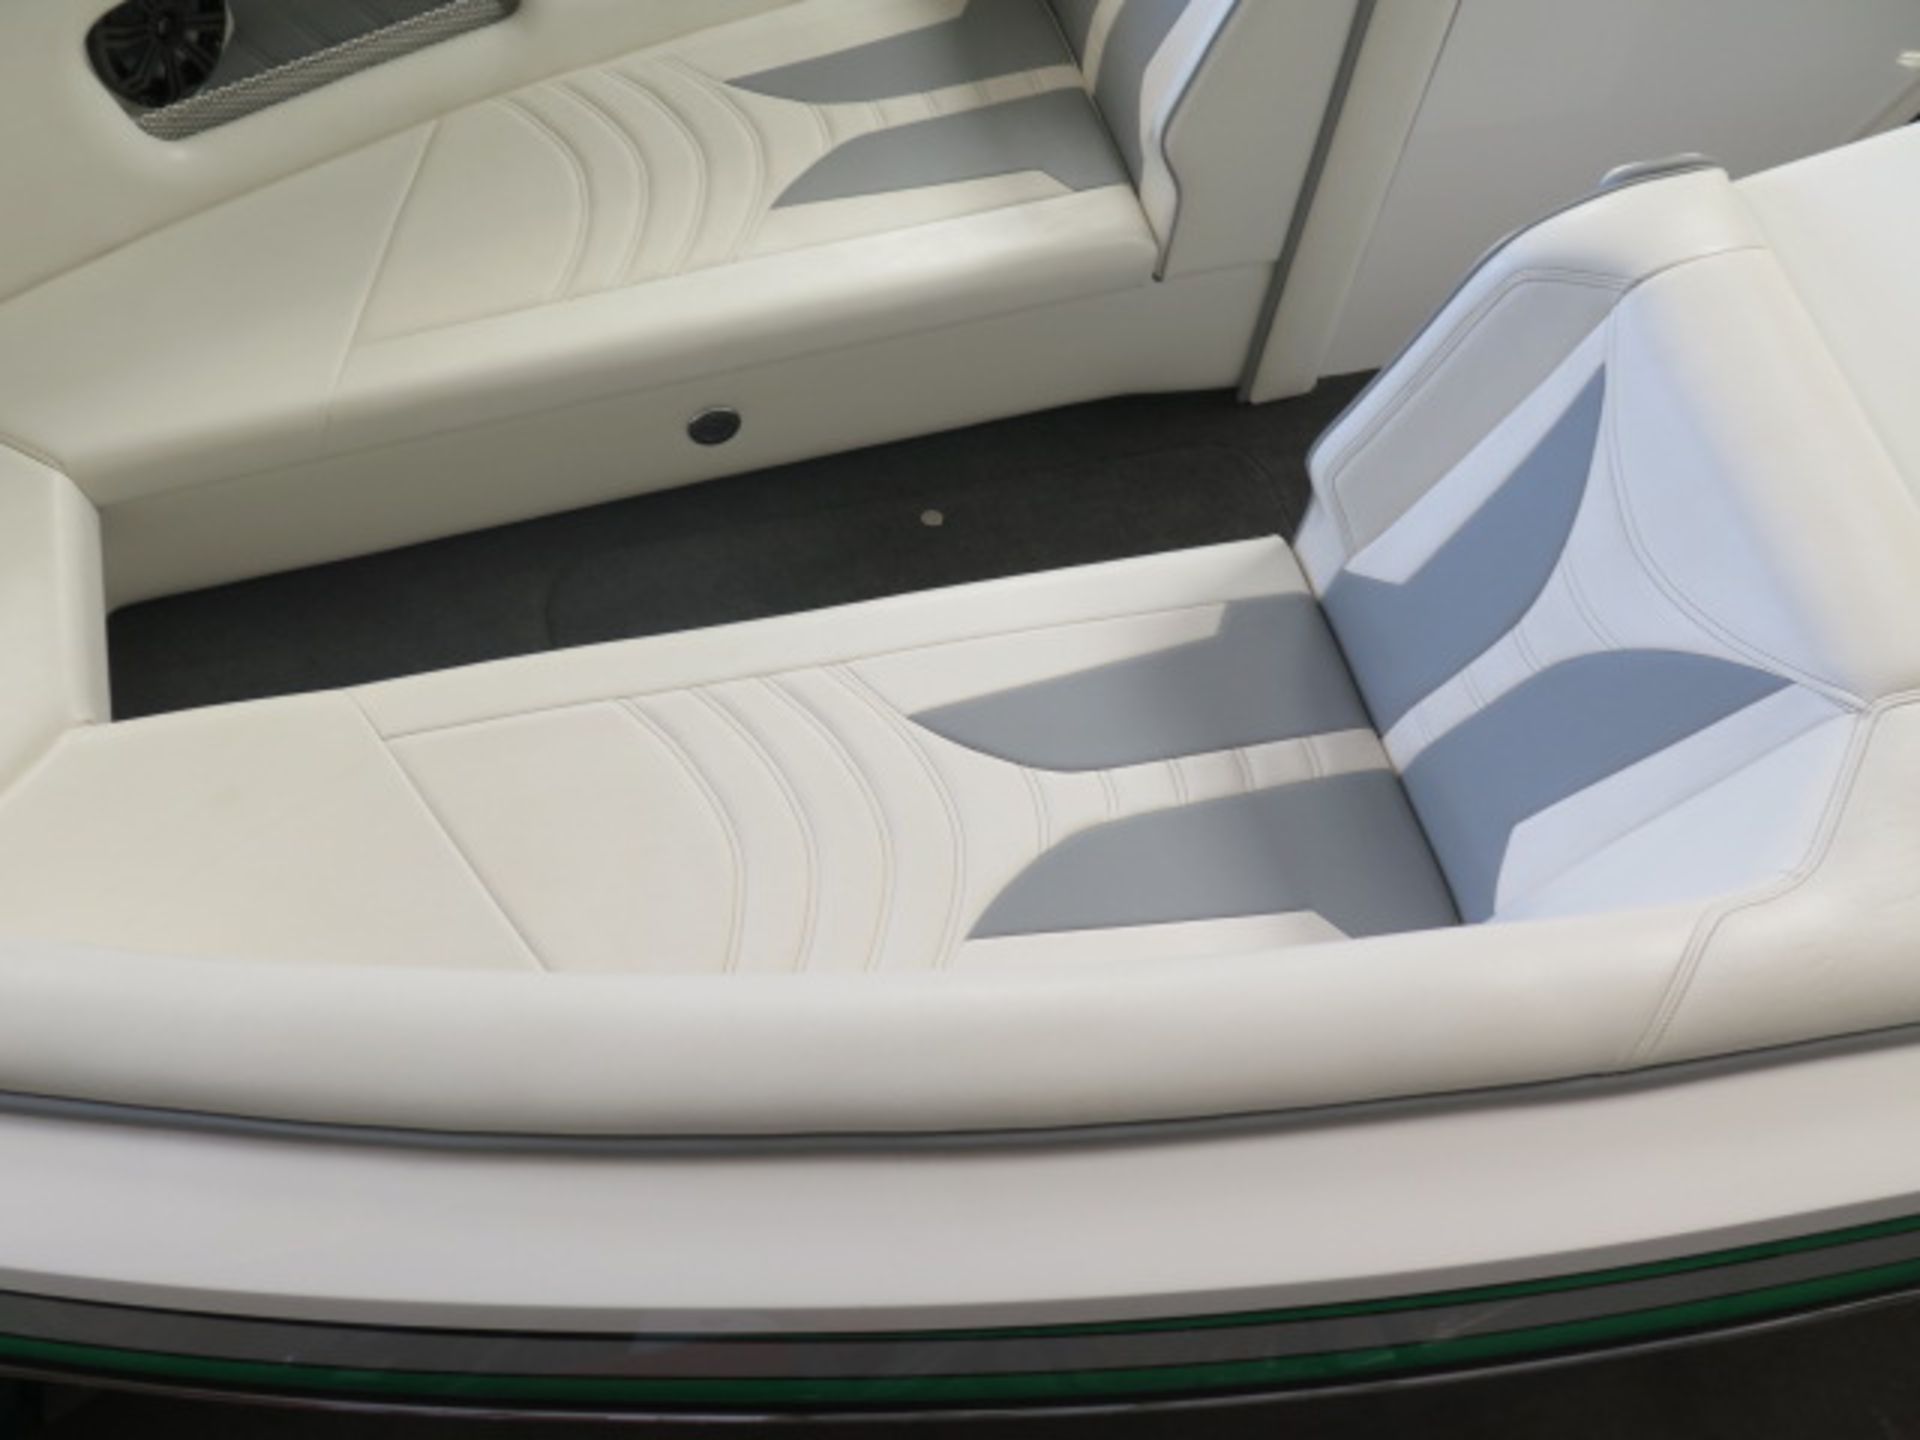 2020 Laveycraft 24' V-Bottom Open Bow Boat w/ Custon Martinez Interior, Boostpower 675Hp, SOLD AS IS - Image 15 of 40